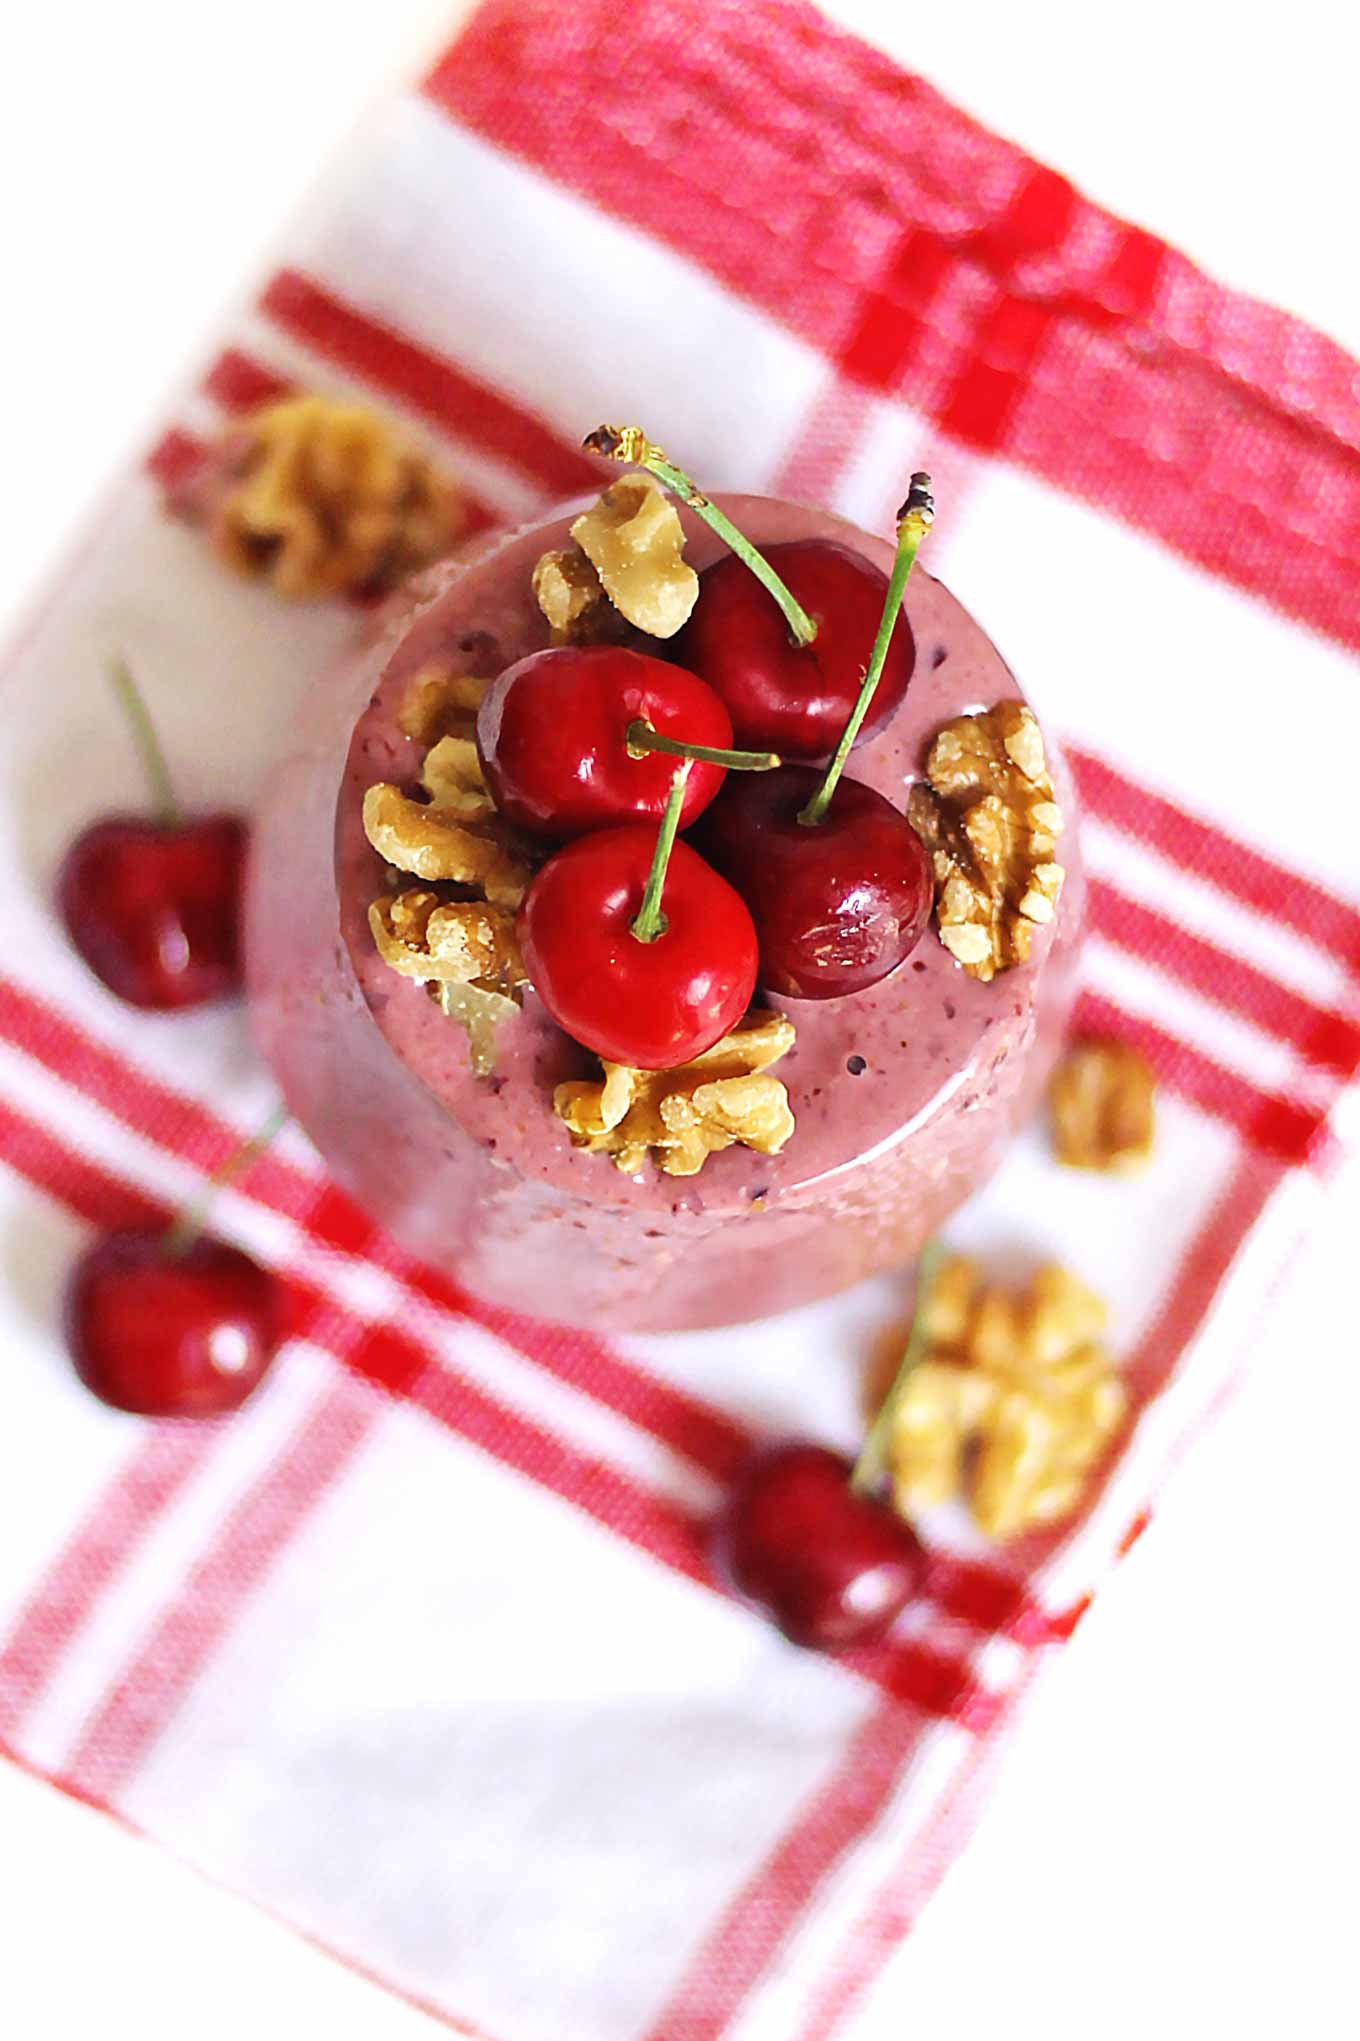 A picture of the top of a cherry smoothie with yogurt, fresh cherries, and walnuts on top.